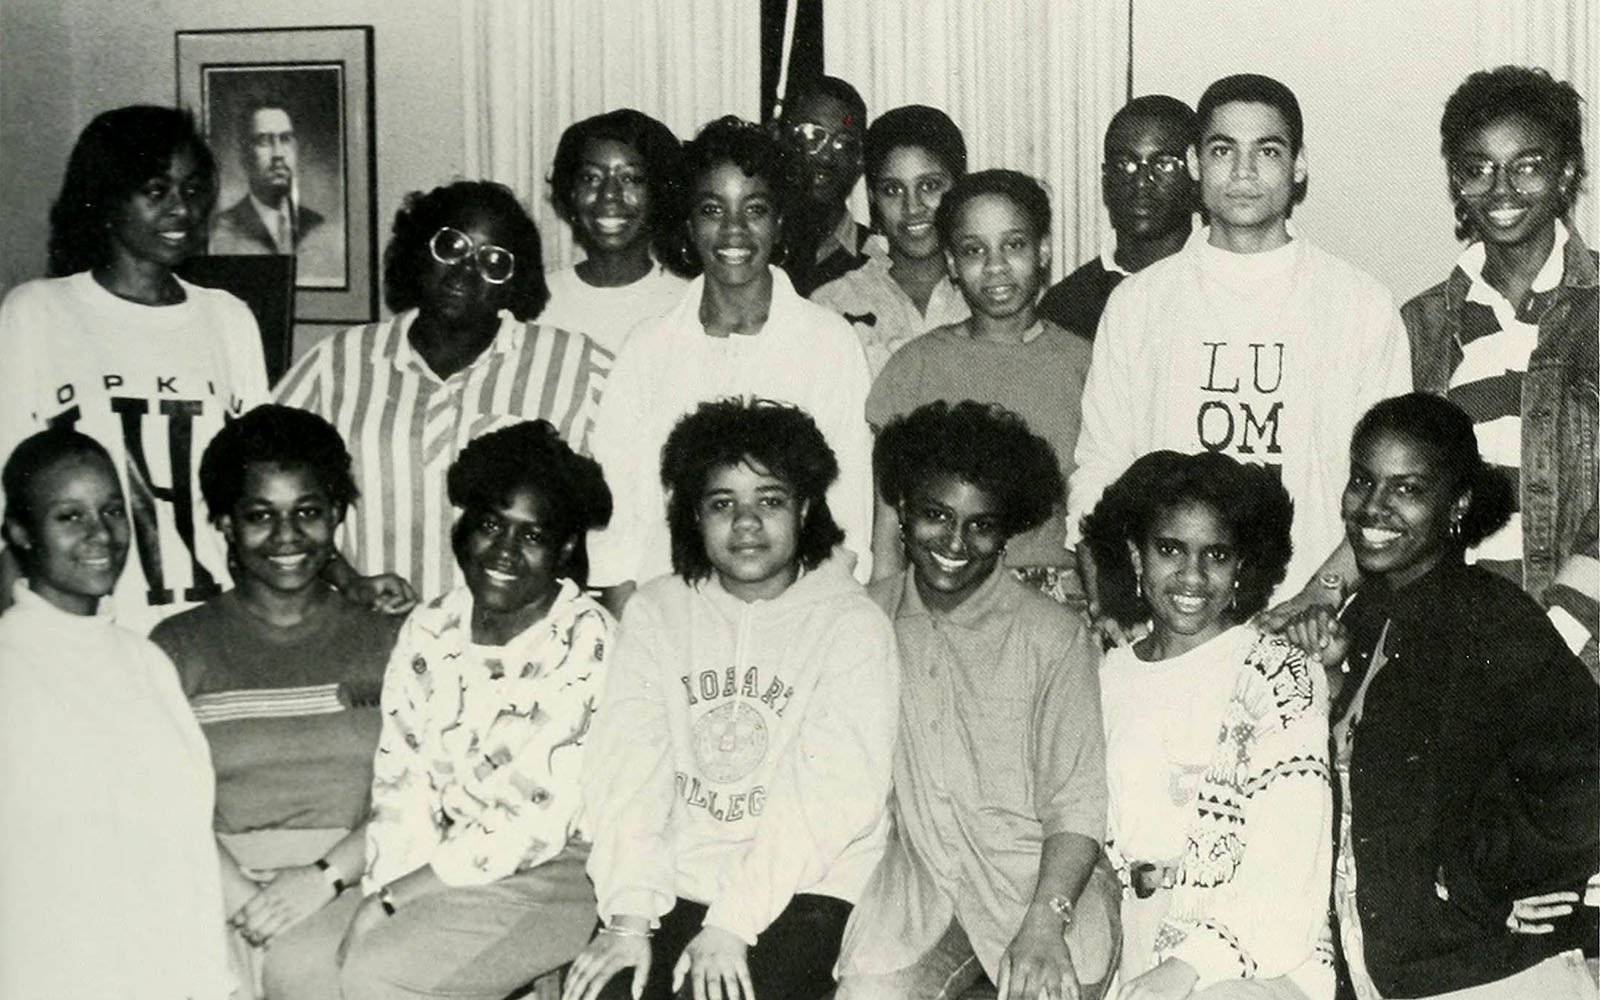 SASS (Swarthmore Afro-American Student Society)